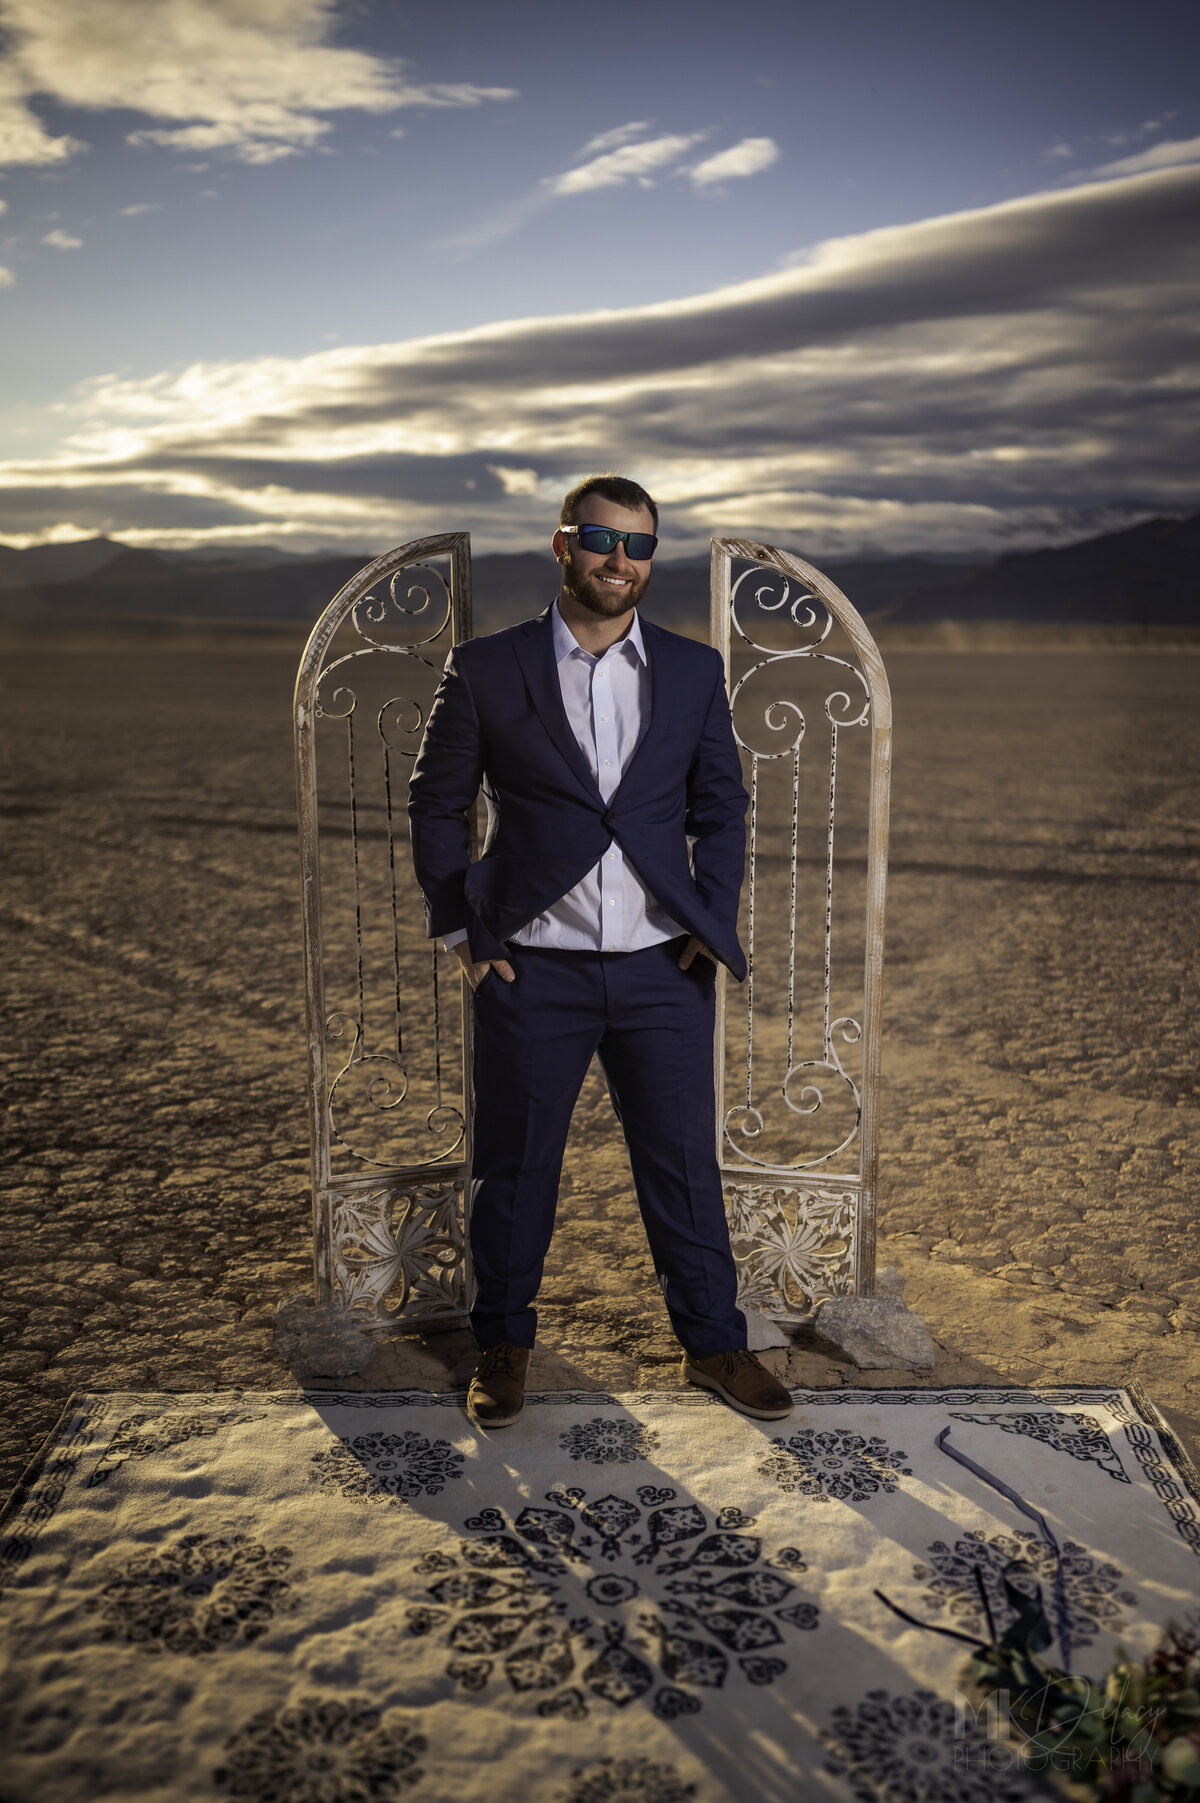 oakley mens straight-backed sunglasses blue suit Dry lake Bed elopement Blue Suit on Groom  flowers by michelle  bride in cream color wedding dress with deep  plunging  neckline mountain skyline  sunset las vegas wedding photographers mk delacy photography